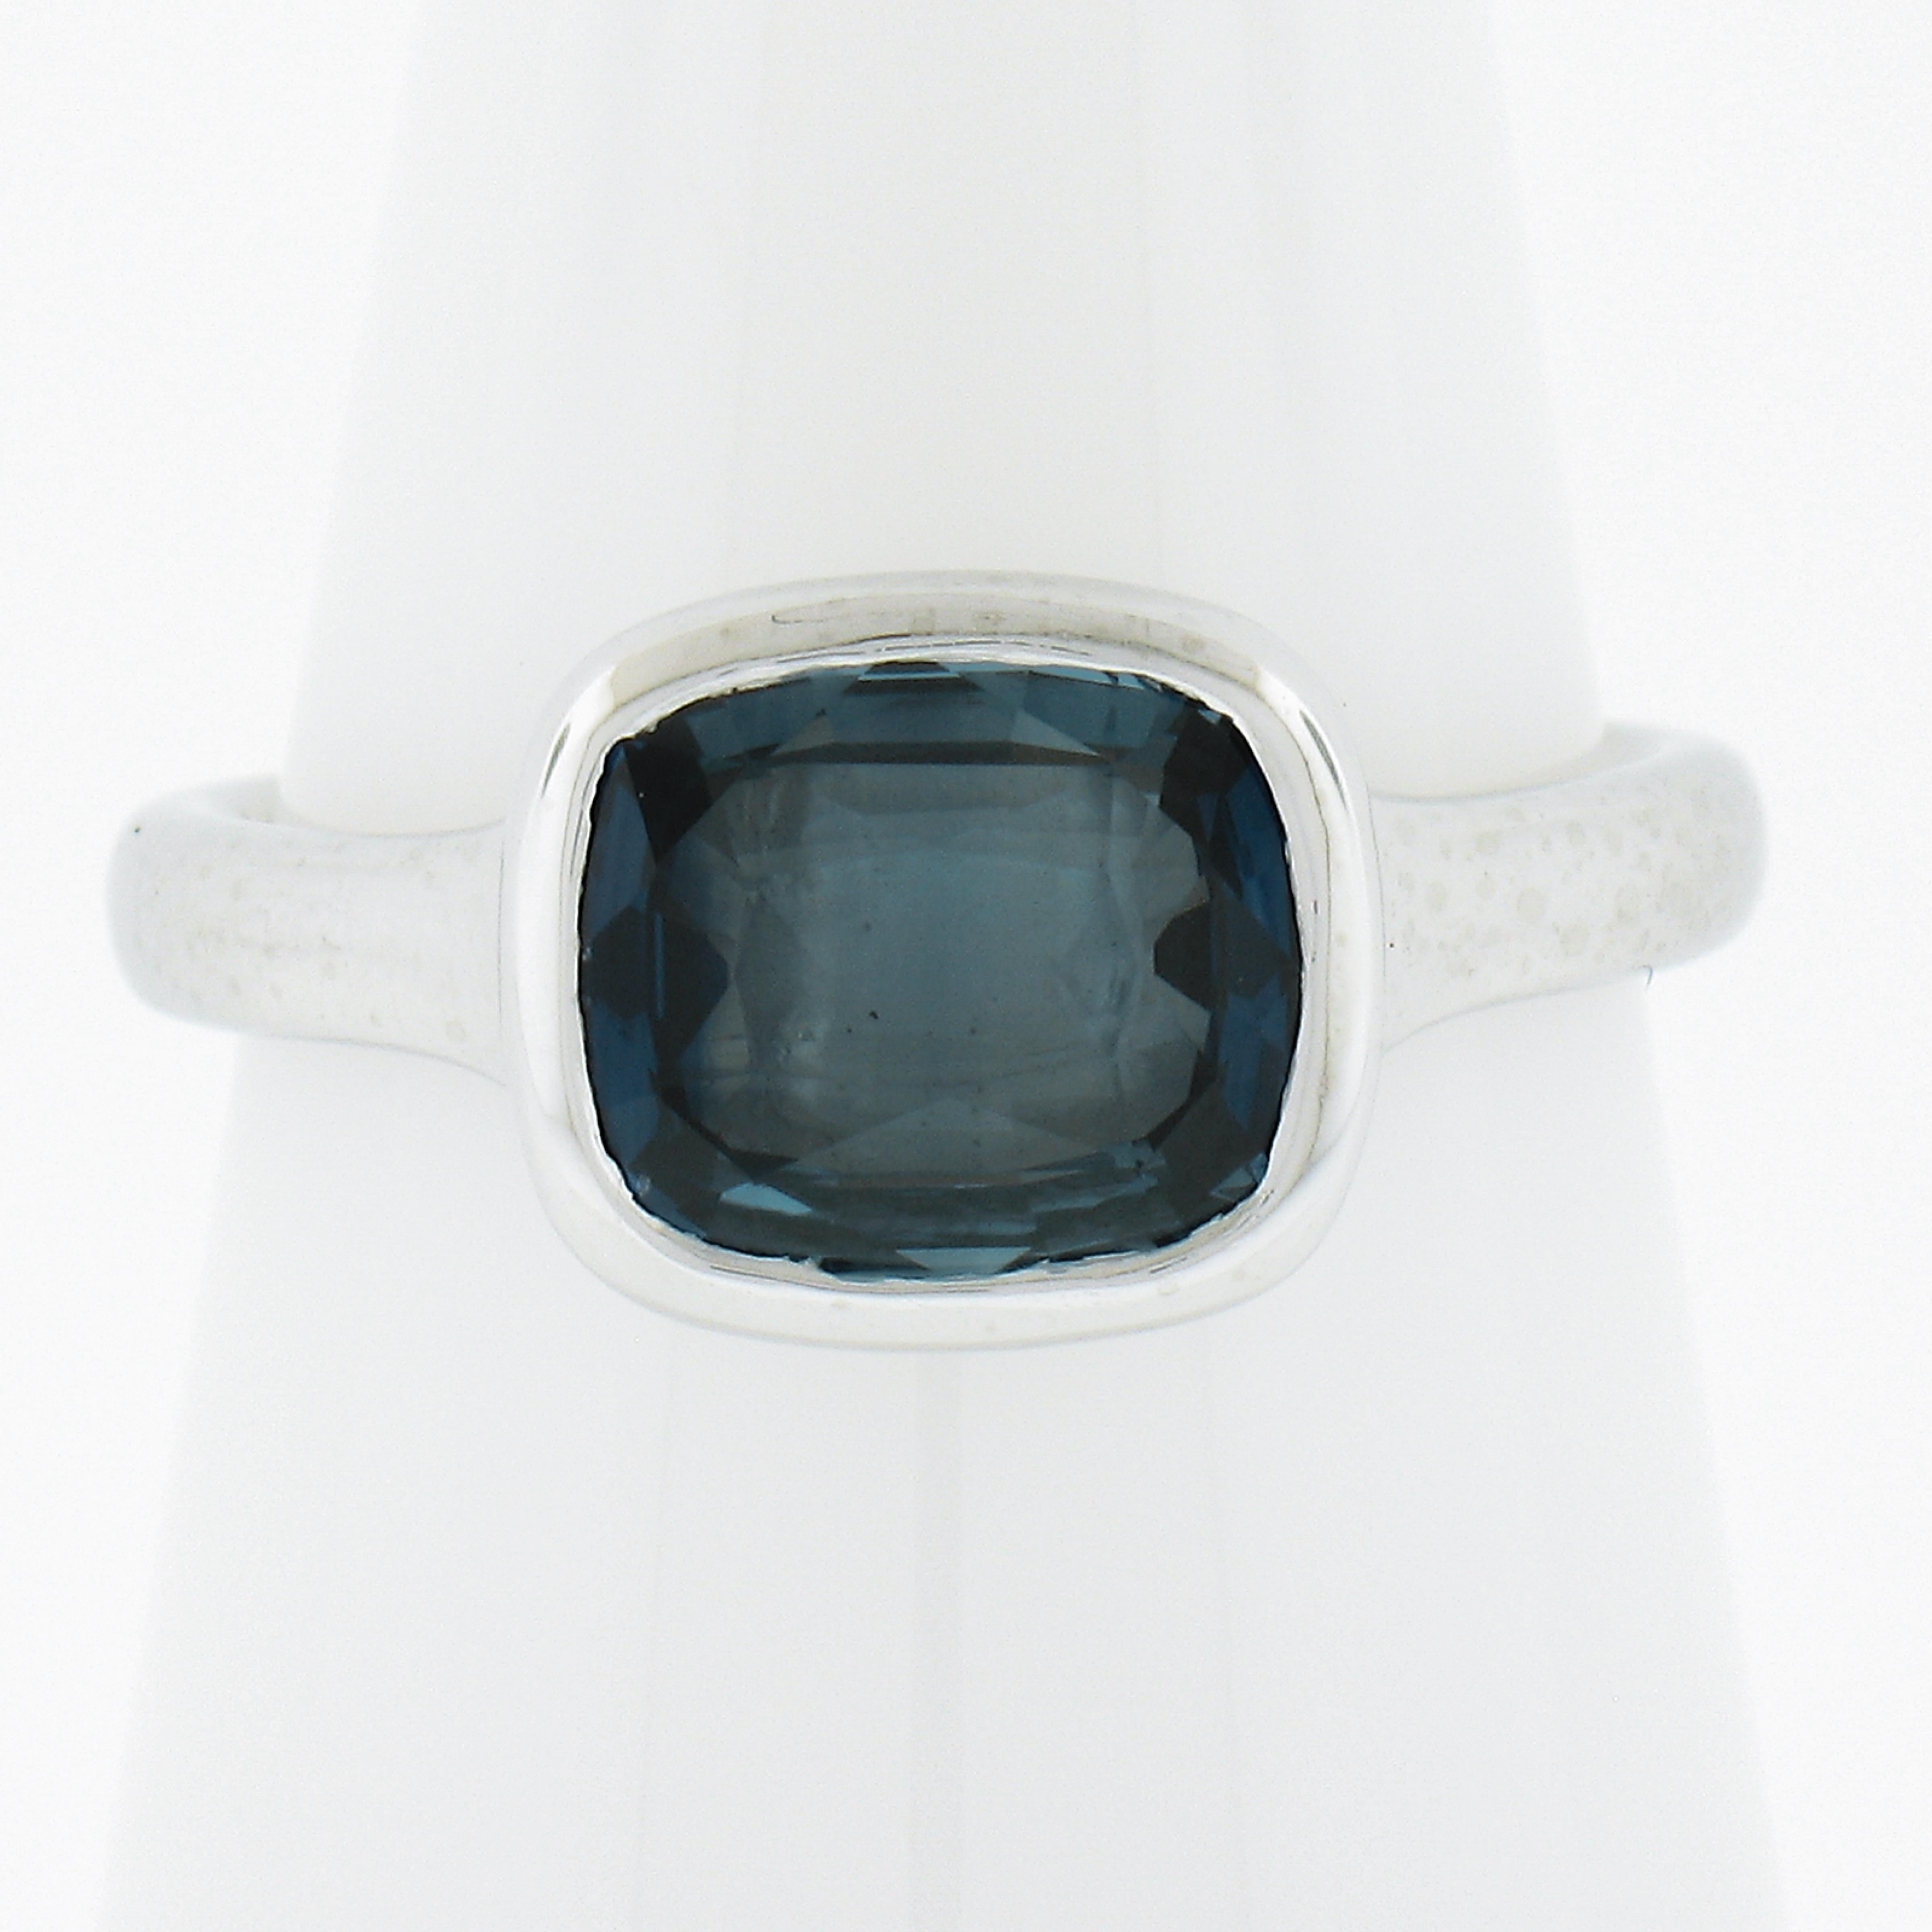 --Stone(s):--
(1) Natural Genuine Sapphire - Cushion Brilliant Cut - Bezel Set - Slightly Greenish Blue Color - No Heat - 2.50ct (exact - certified)
** See Certification Details Below for Complete Info **
Total Carat Weight:	2.50 (exact)

Material: